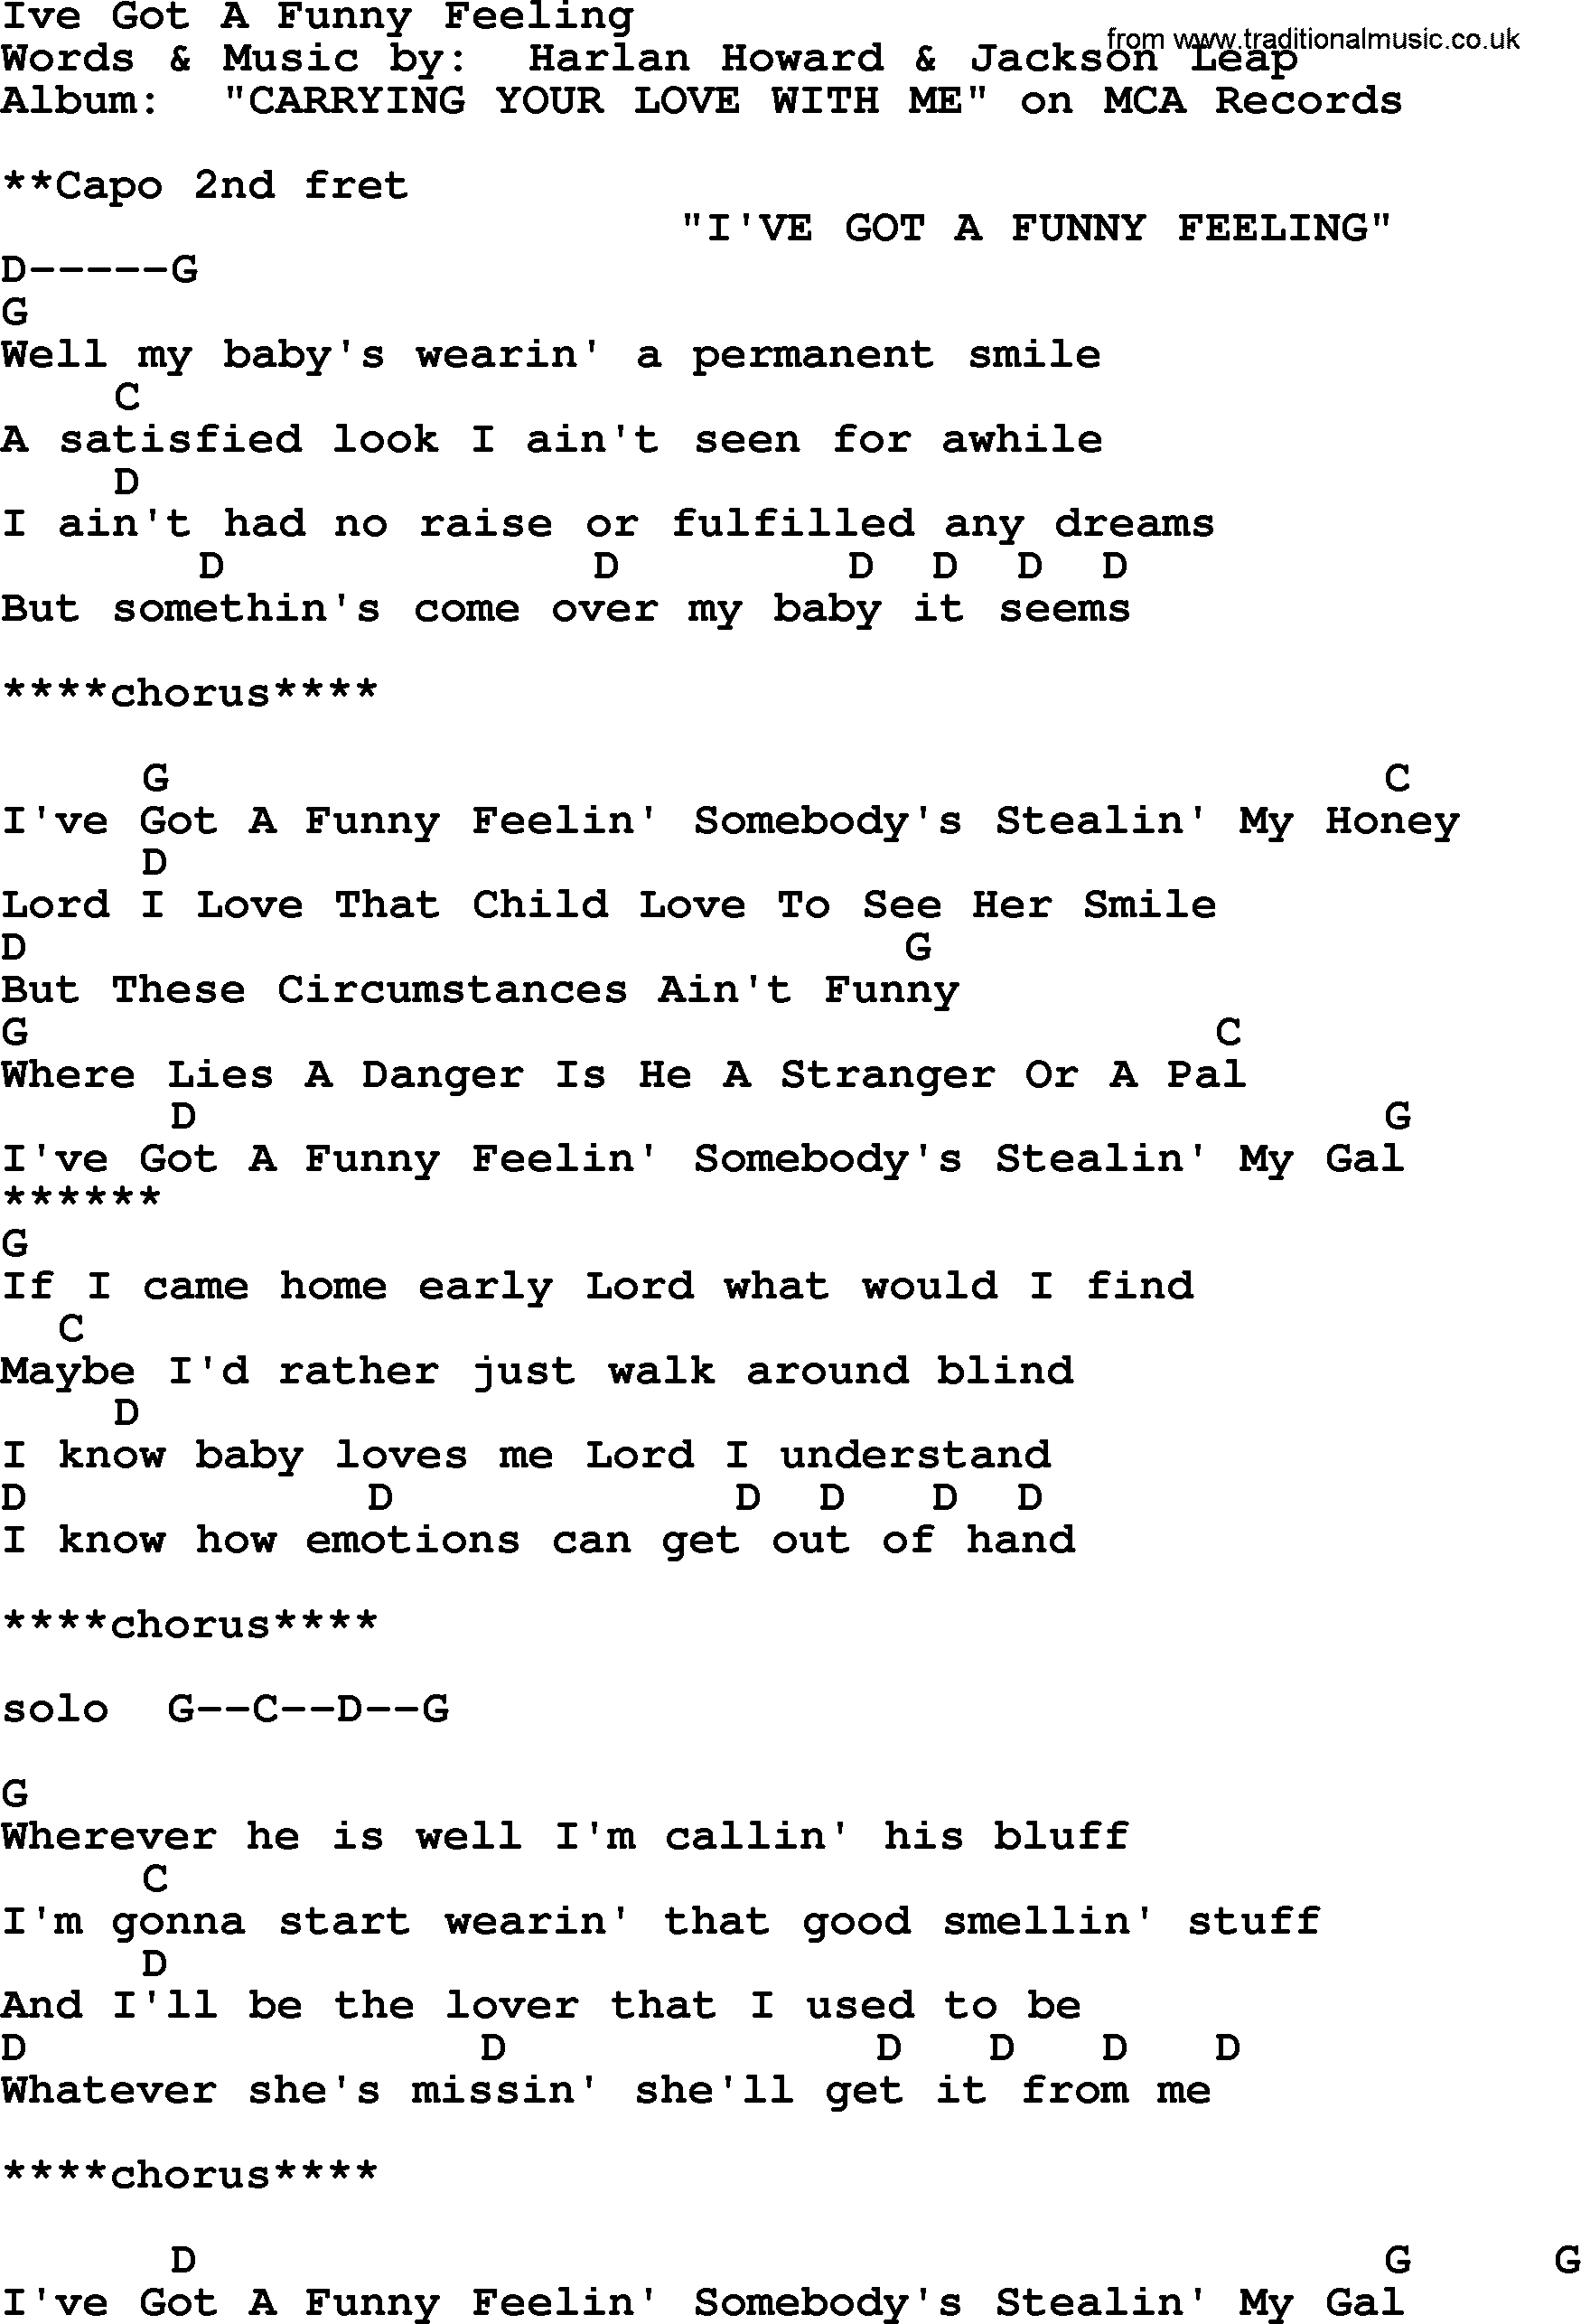 George Strait song: Ive Got A Funny Feeling, lyrics and chords